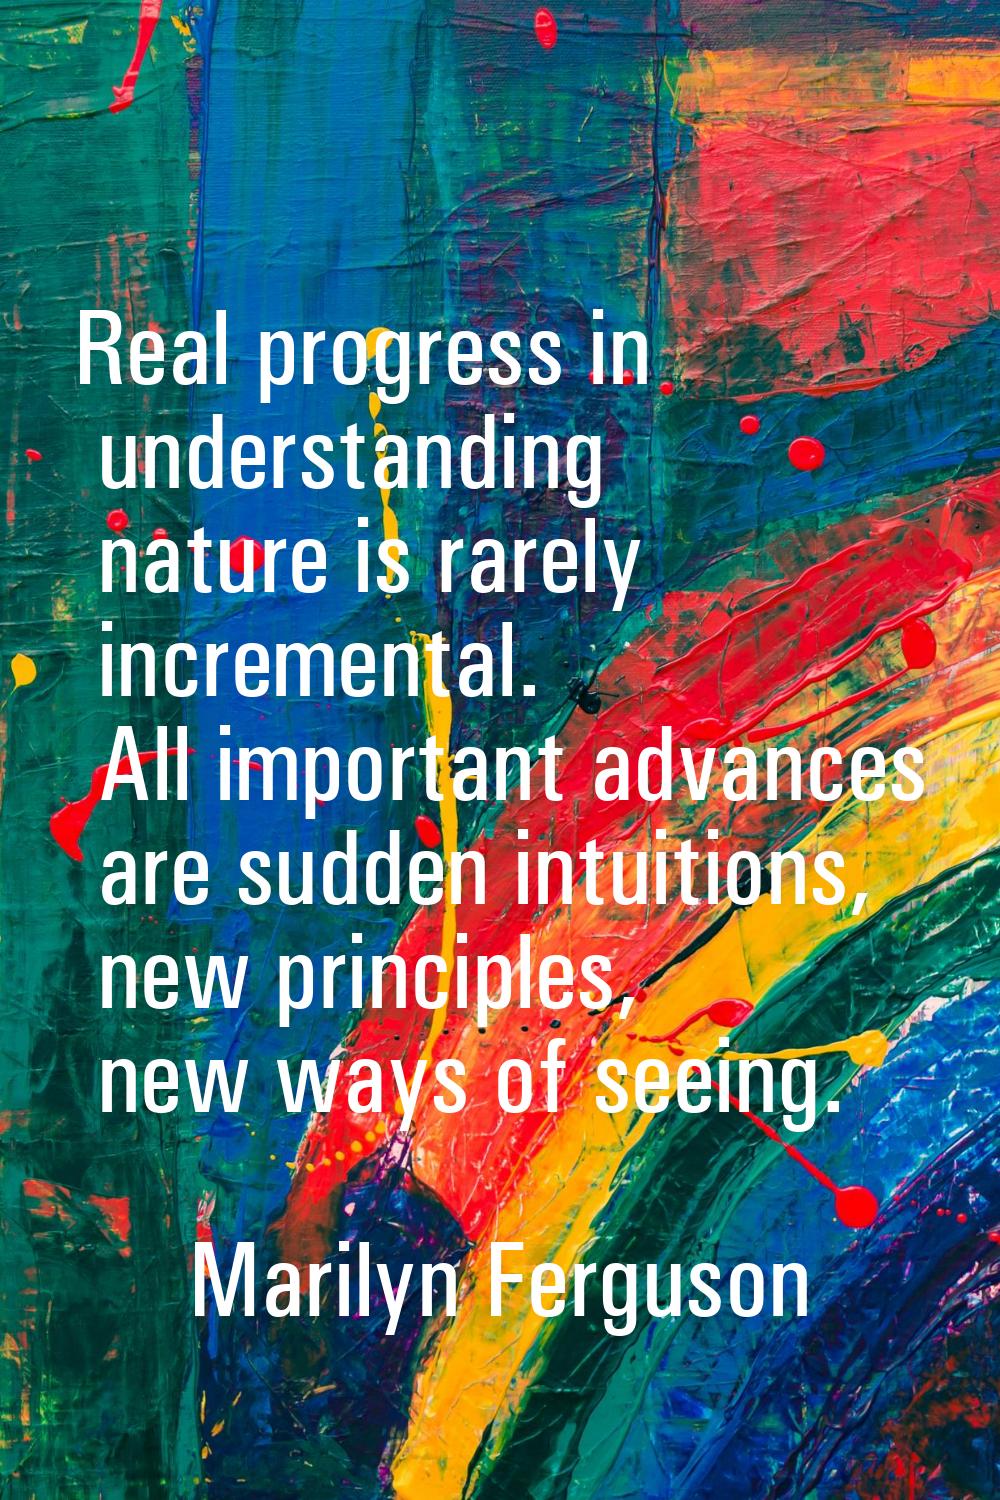 Real progress in understanding nature is rarely incremental. All important advances are sudden intu